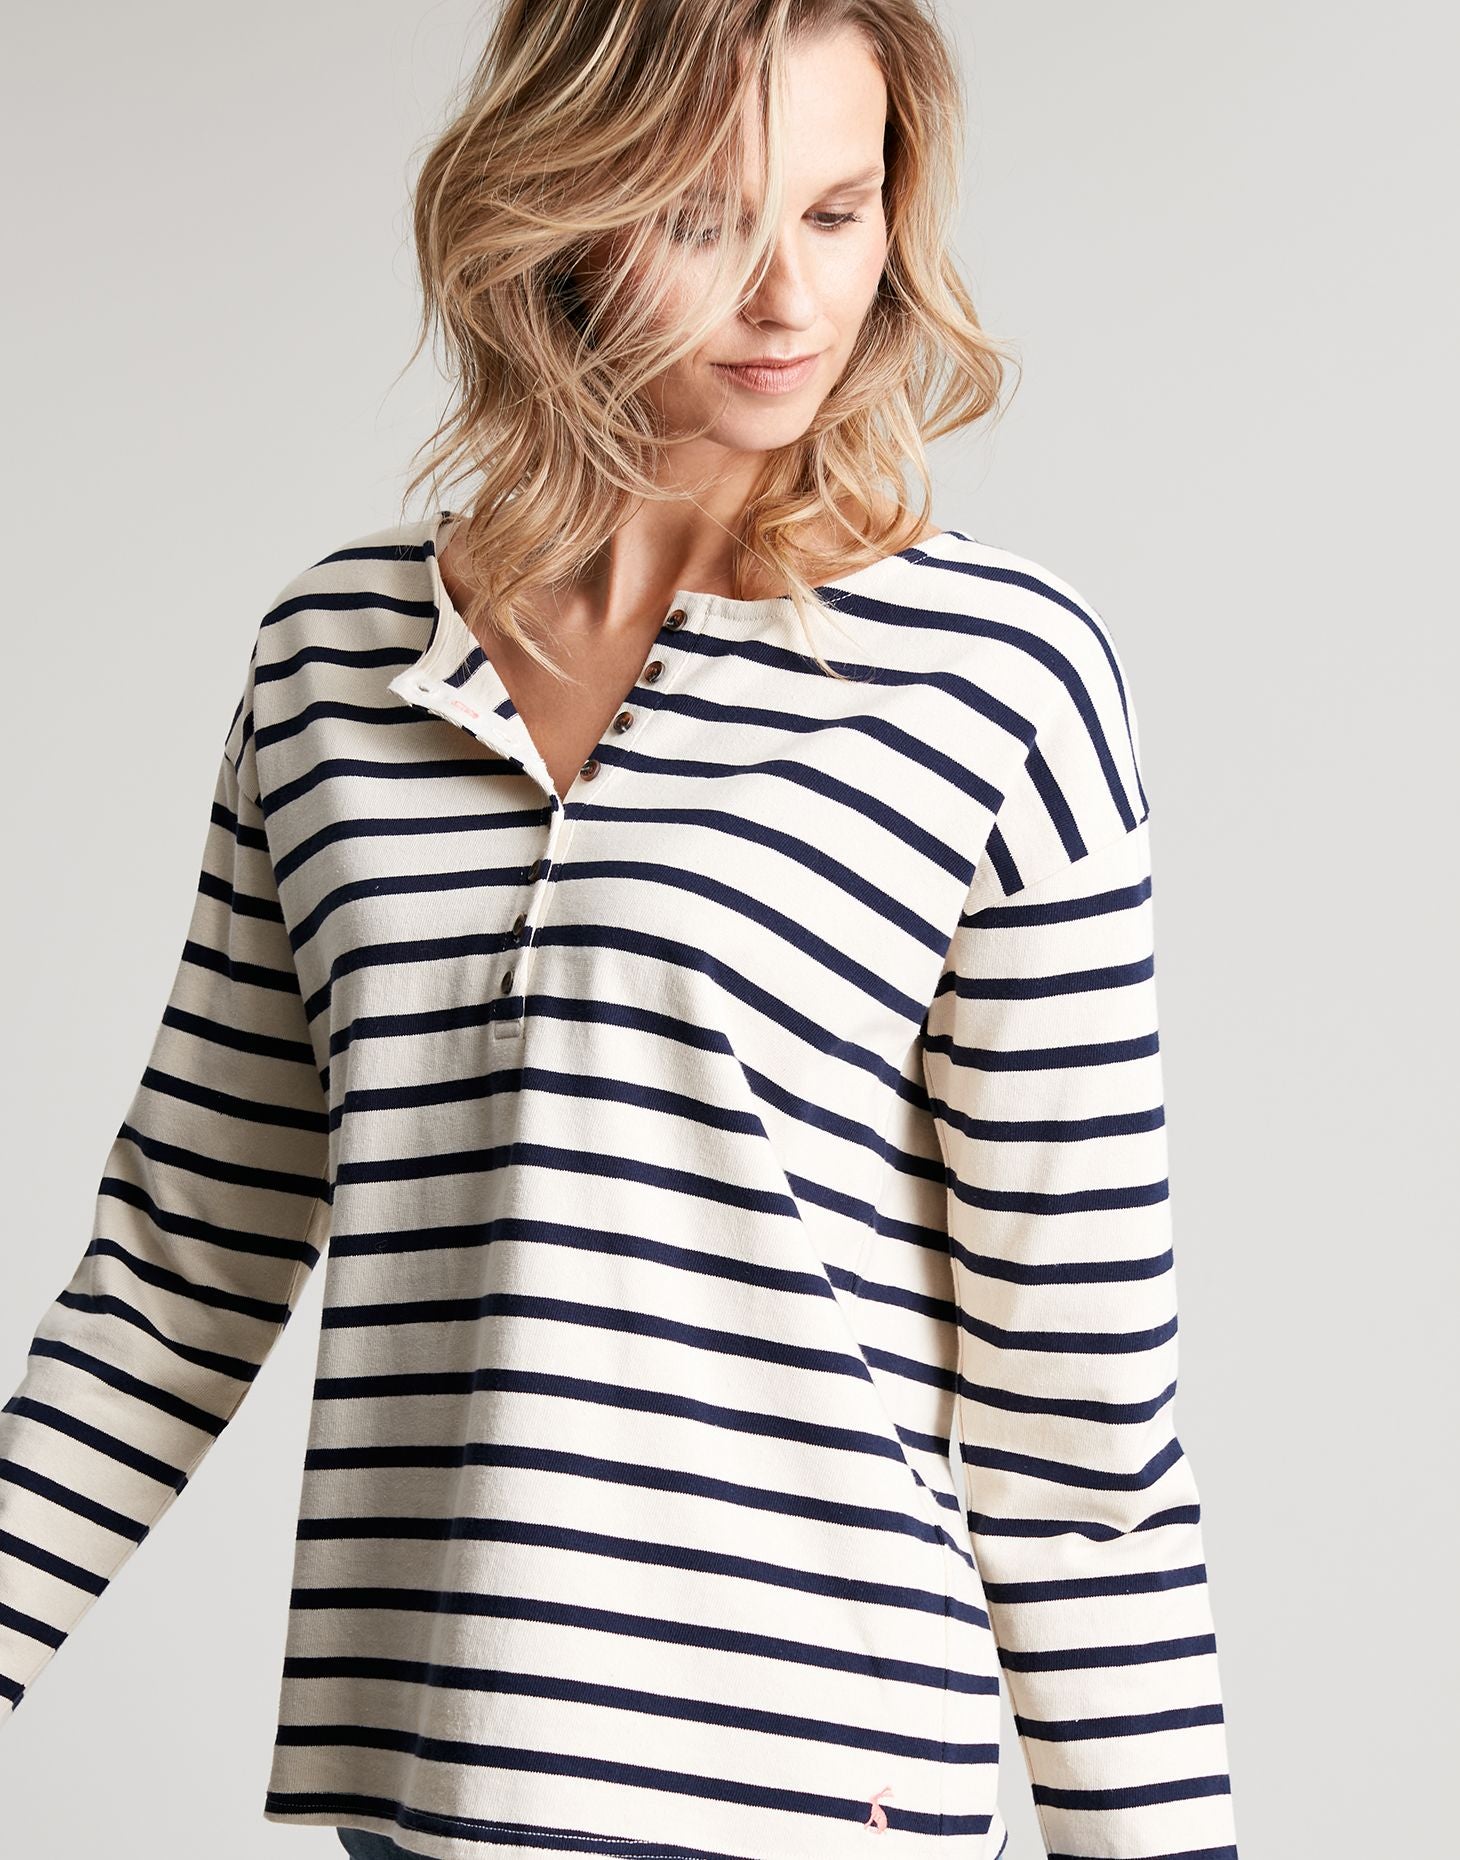 Joules - Olive Long Sleeve Henley Top - CREAM NAVY STRIPE